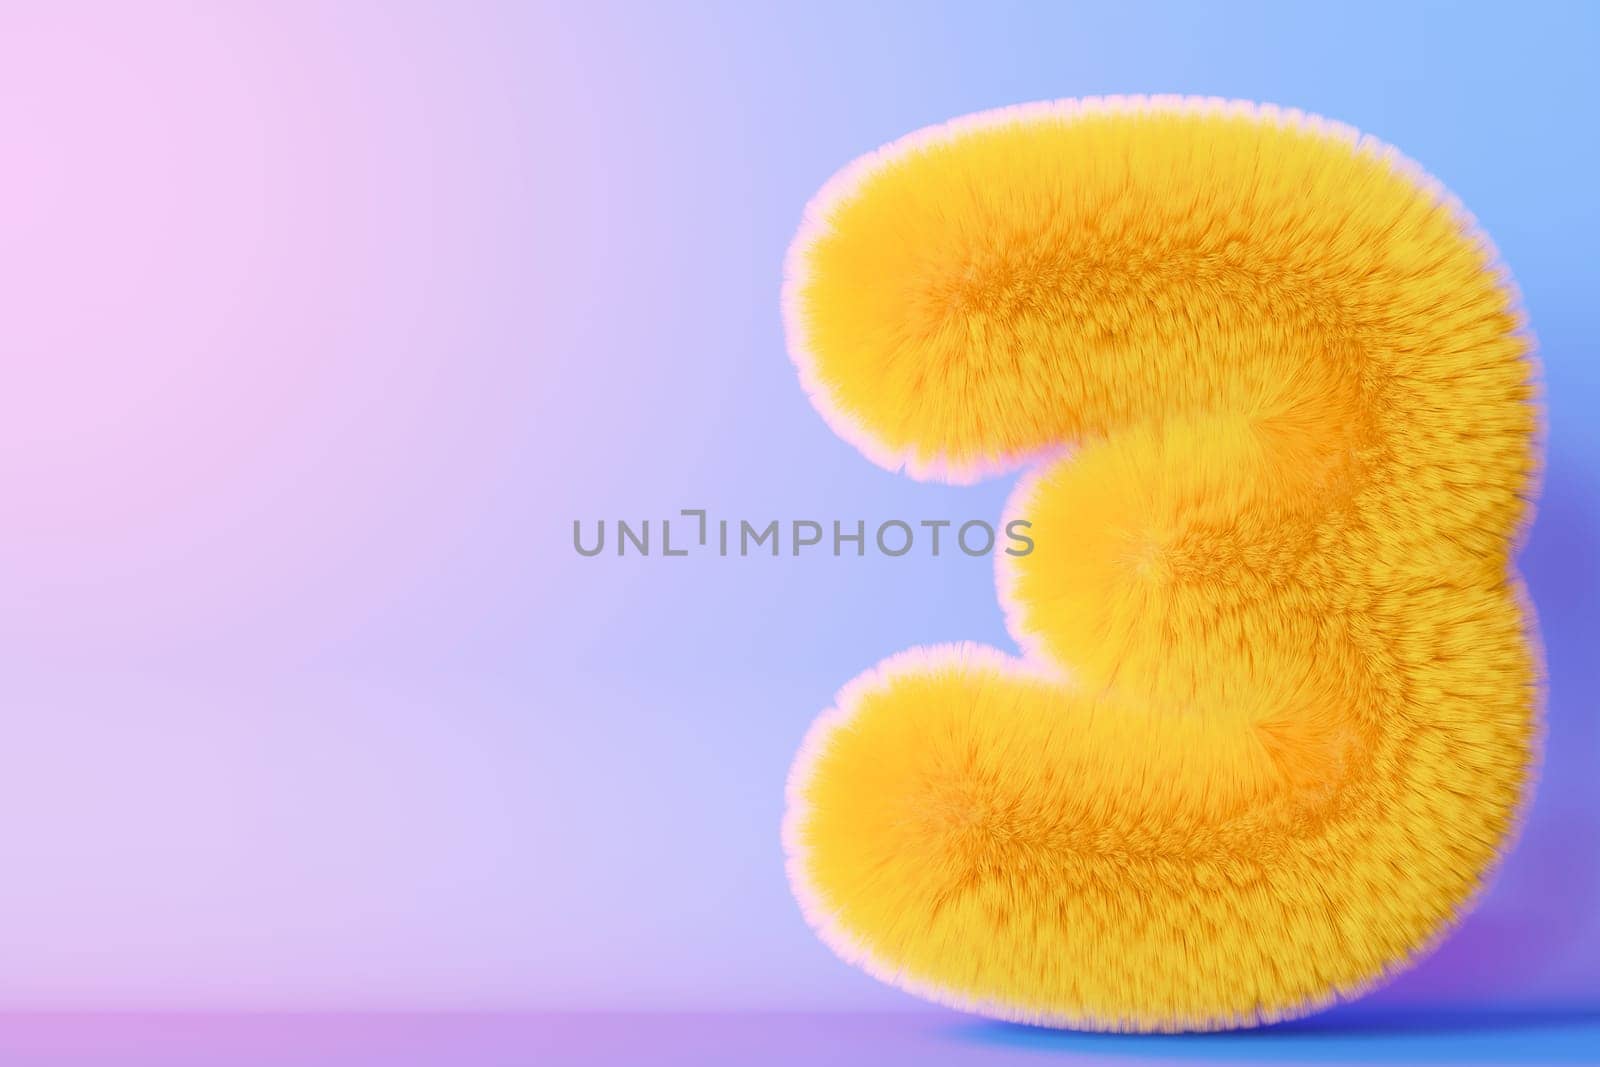 Playful, fluffy number three on gradient background. Yellow symbol 3. Invitation for a third birthday party, or any kids event celebrating a 3rd milestone. Vibrant, neon colors. Copy space. 3D